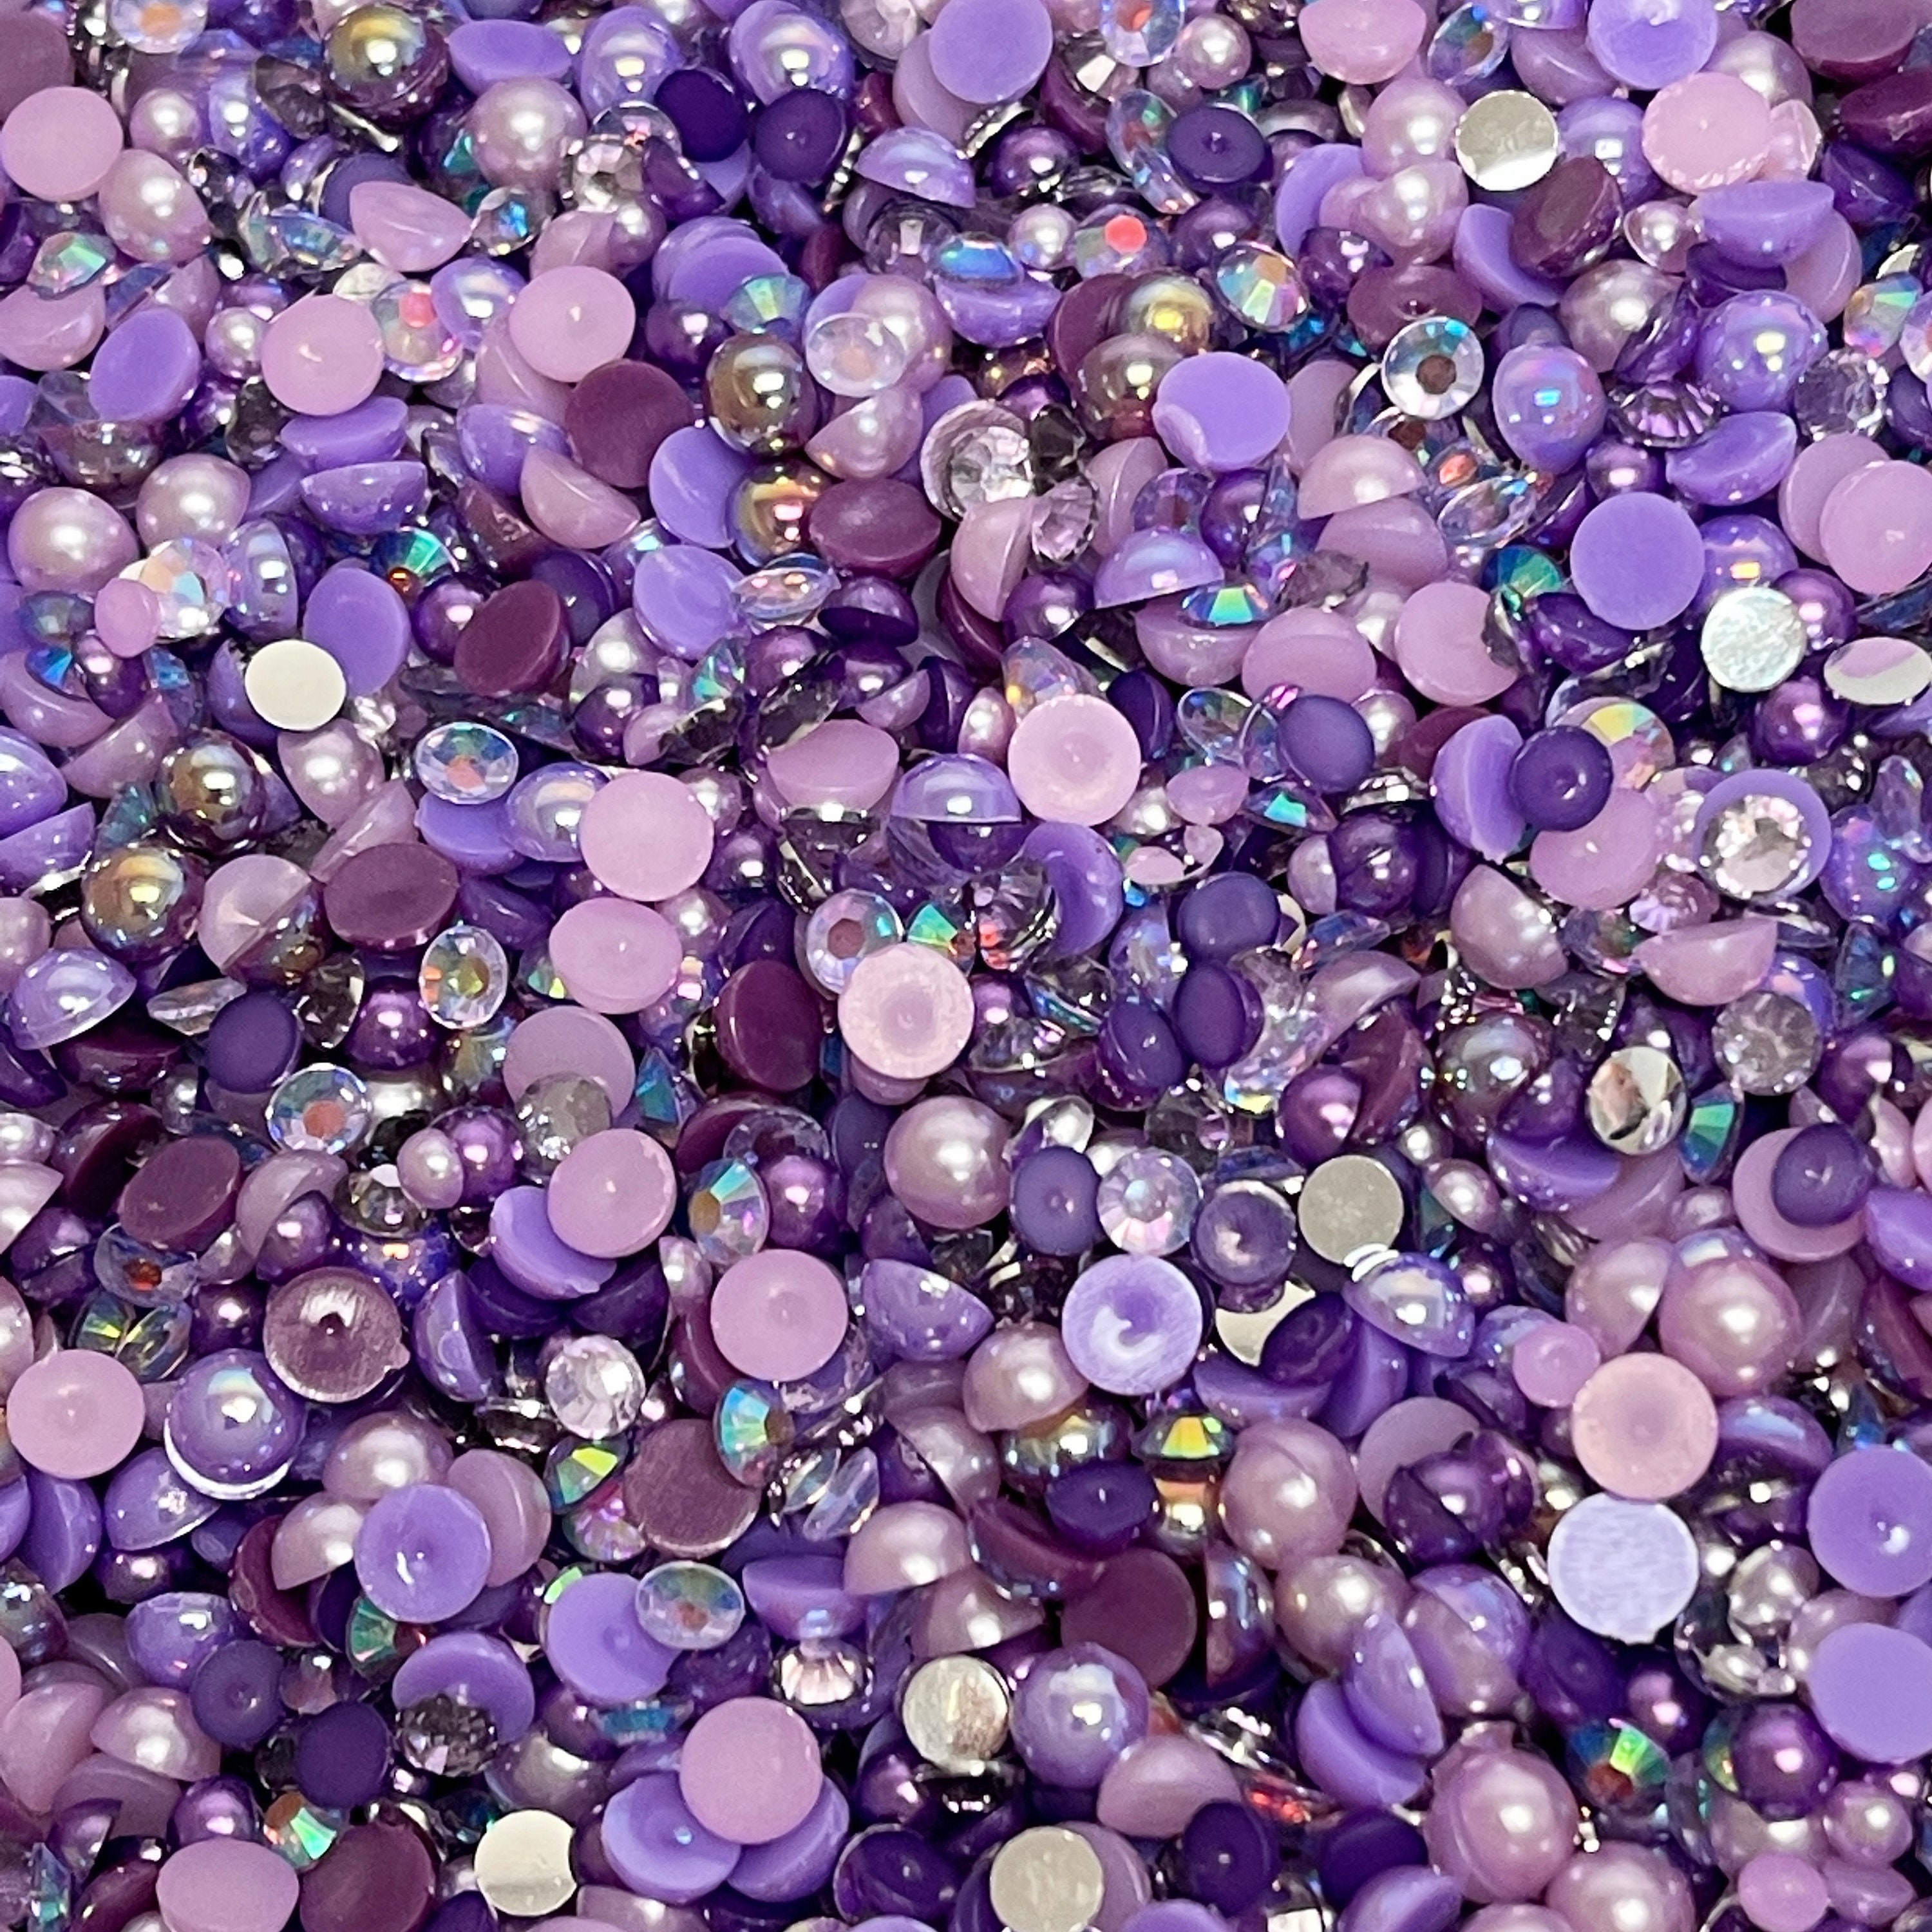  7500Pcs Dark Purple Rhinestones Flatback with b 7000 Glue for  Crafts Clothes Clothing,Violet Rhinestones Deep Purple Flat Back Resin  Crystal Gems for Shoes Shirt Sneakers,Mixed Sizes 6ss-20ss Diamonds